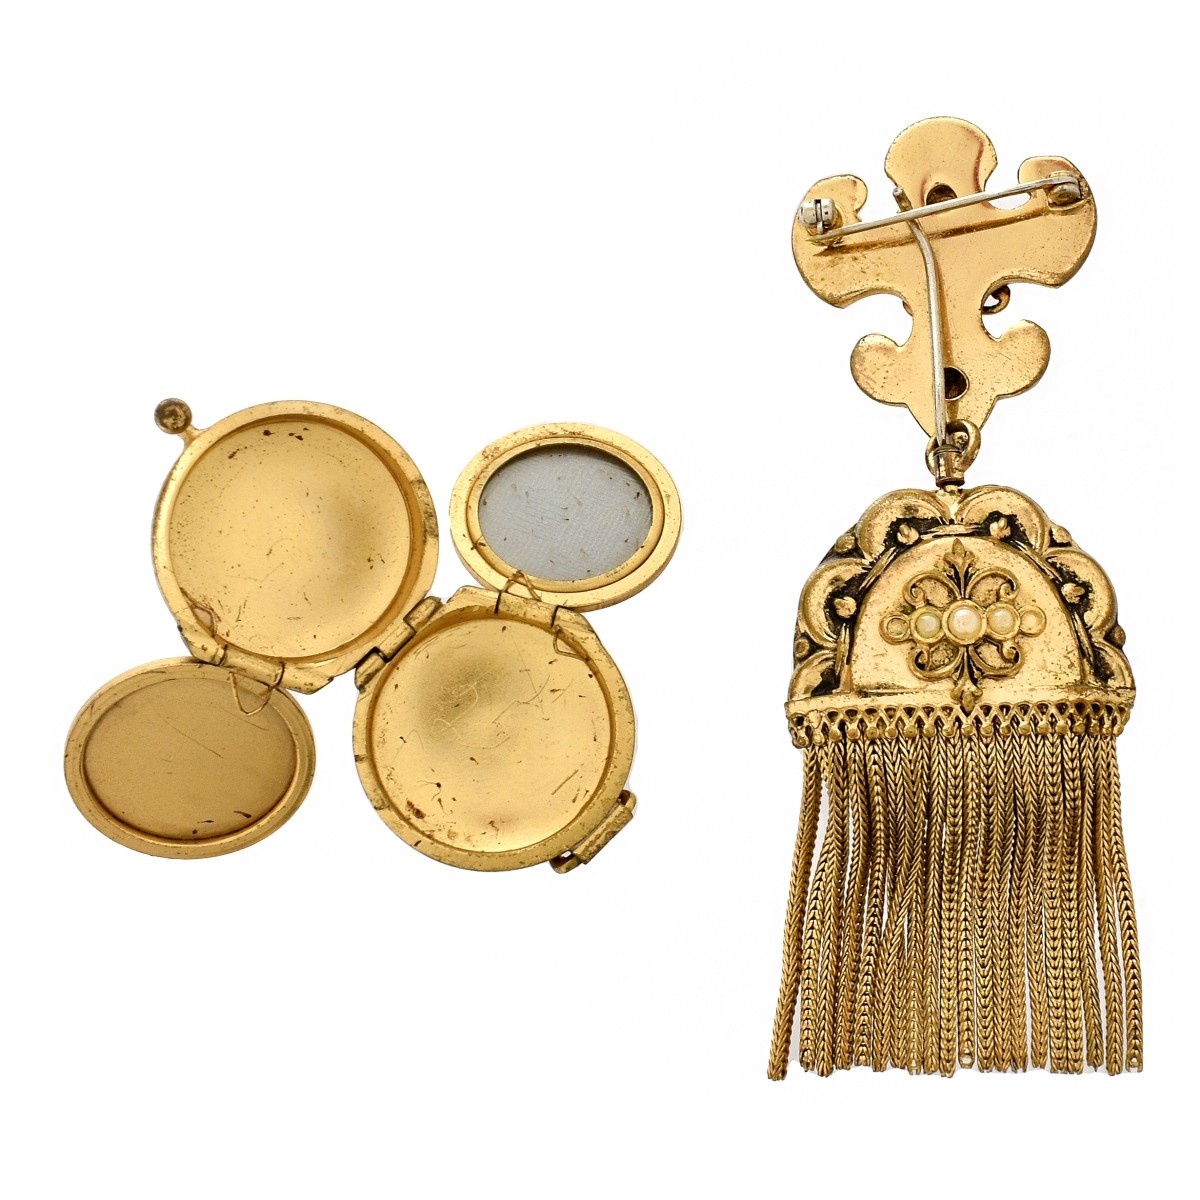 Gold Filled Locket and Watch Brooch